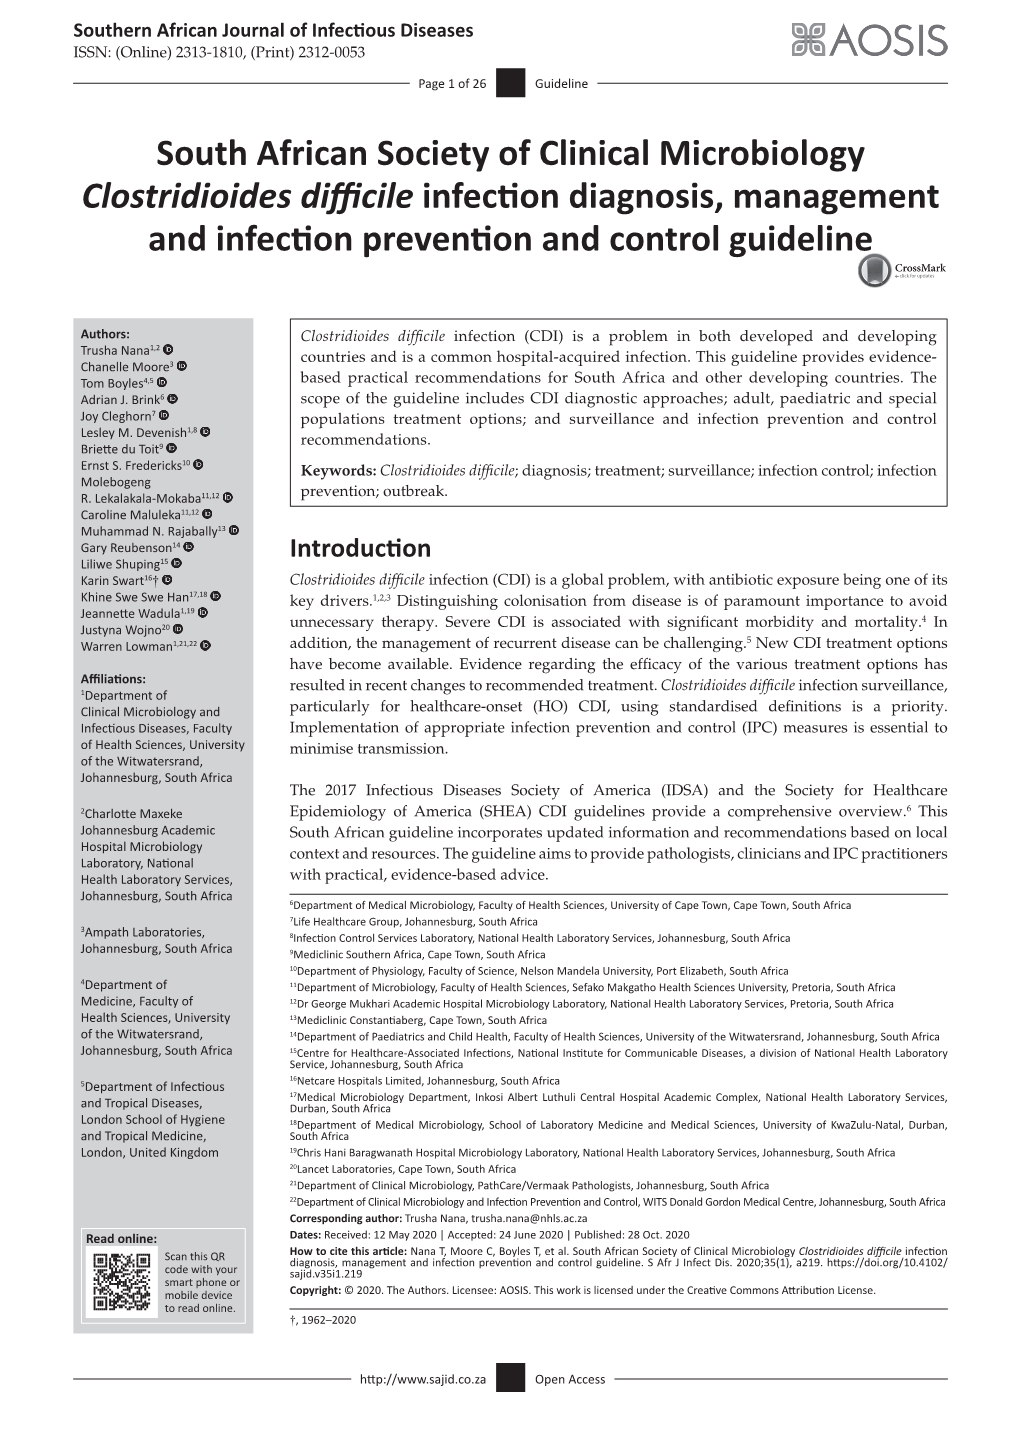 South African Society of Clinical Microbiology Clostridioides Difficile Infection Diagnosis, Management and Infection Prevention and Control Guideline